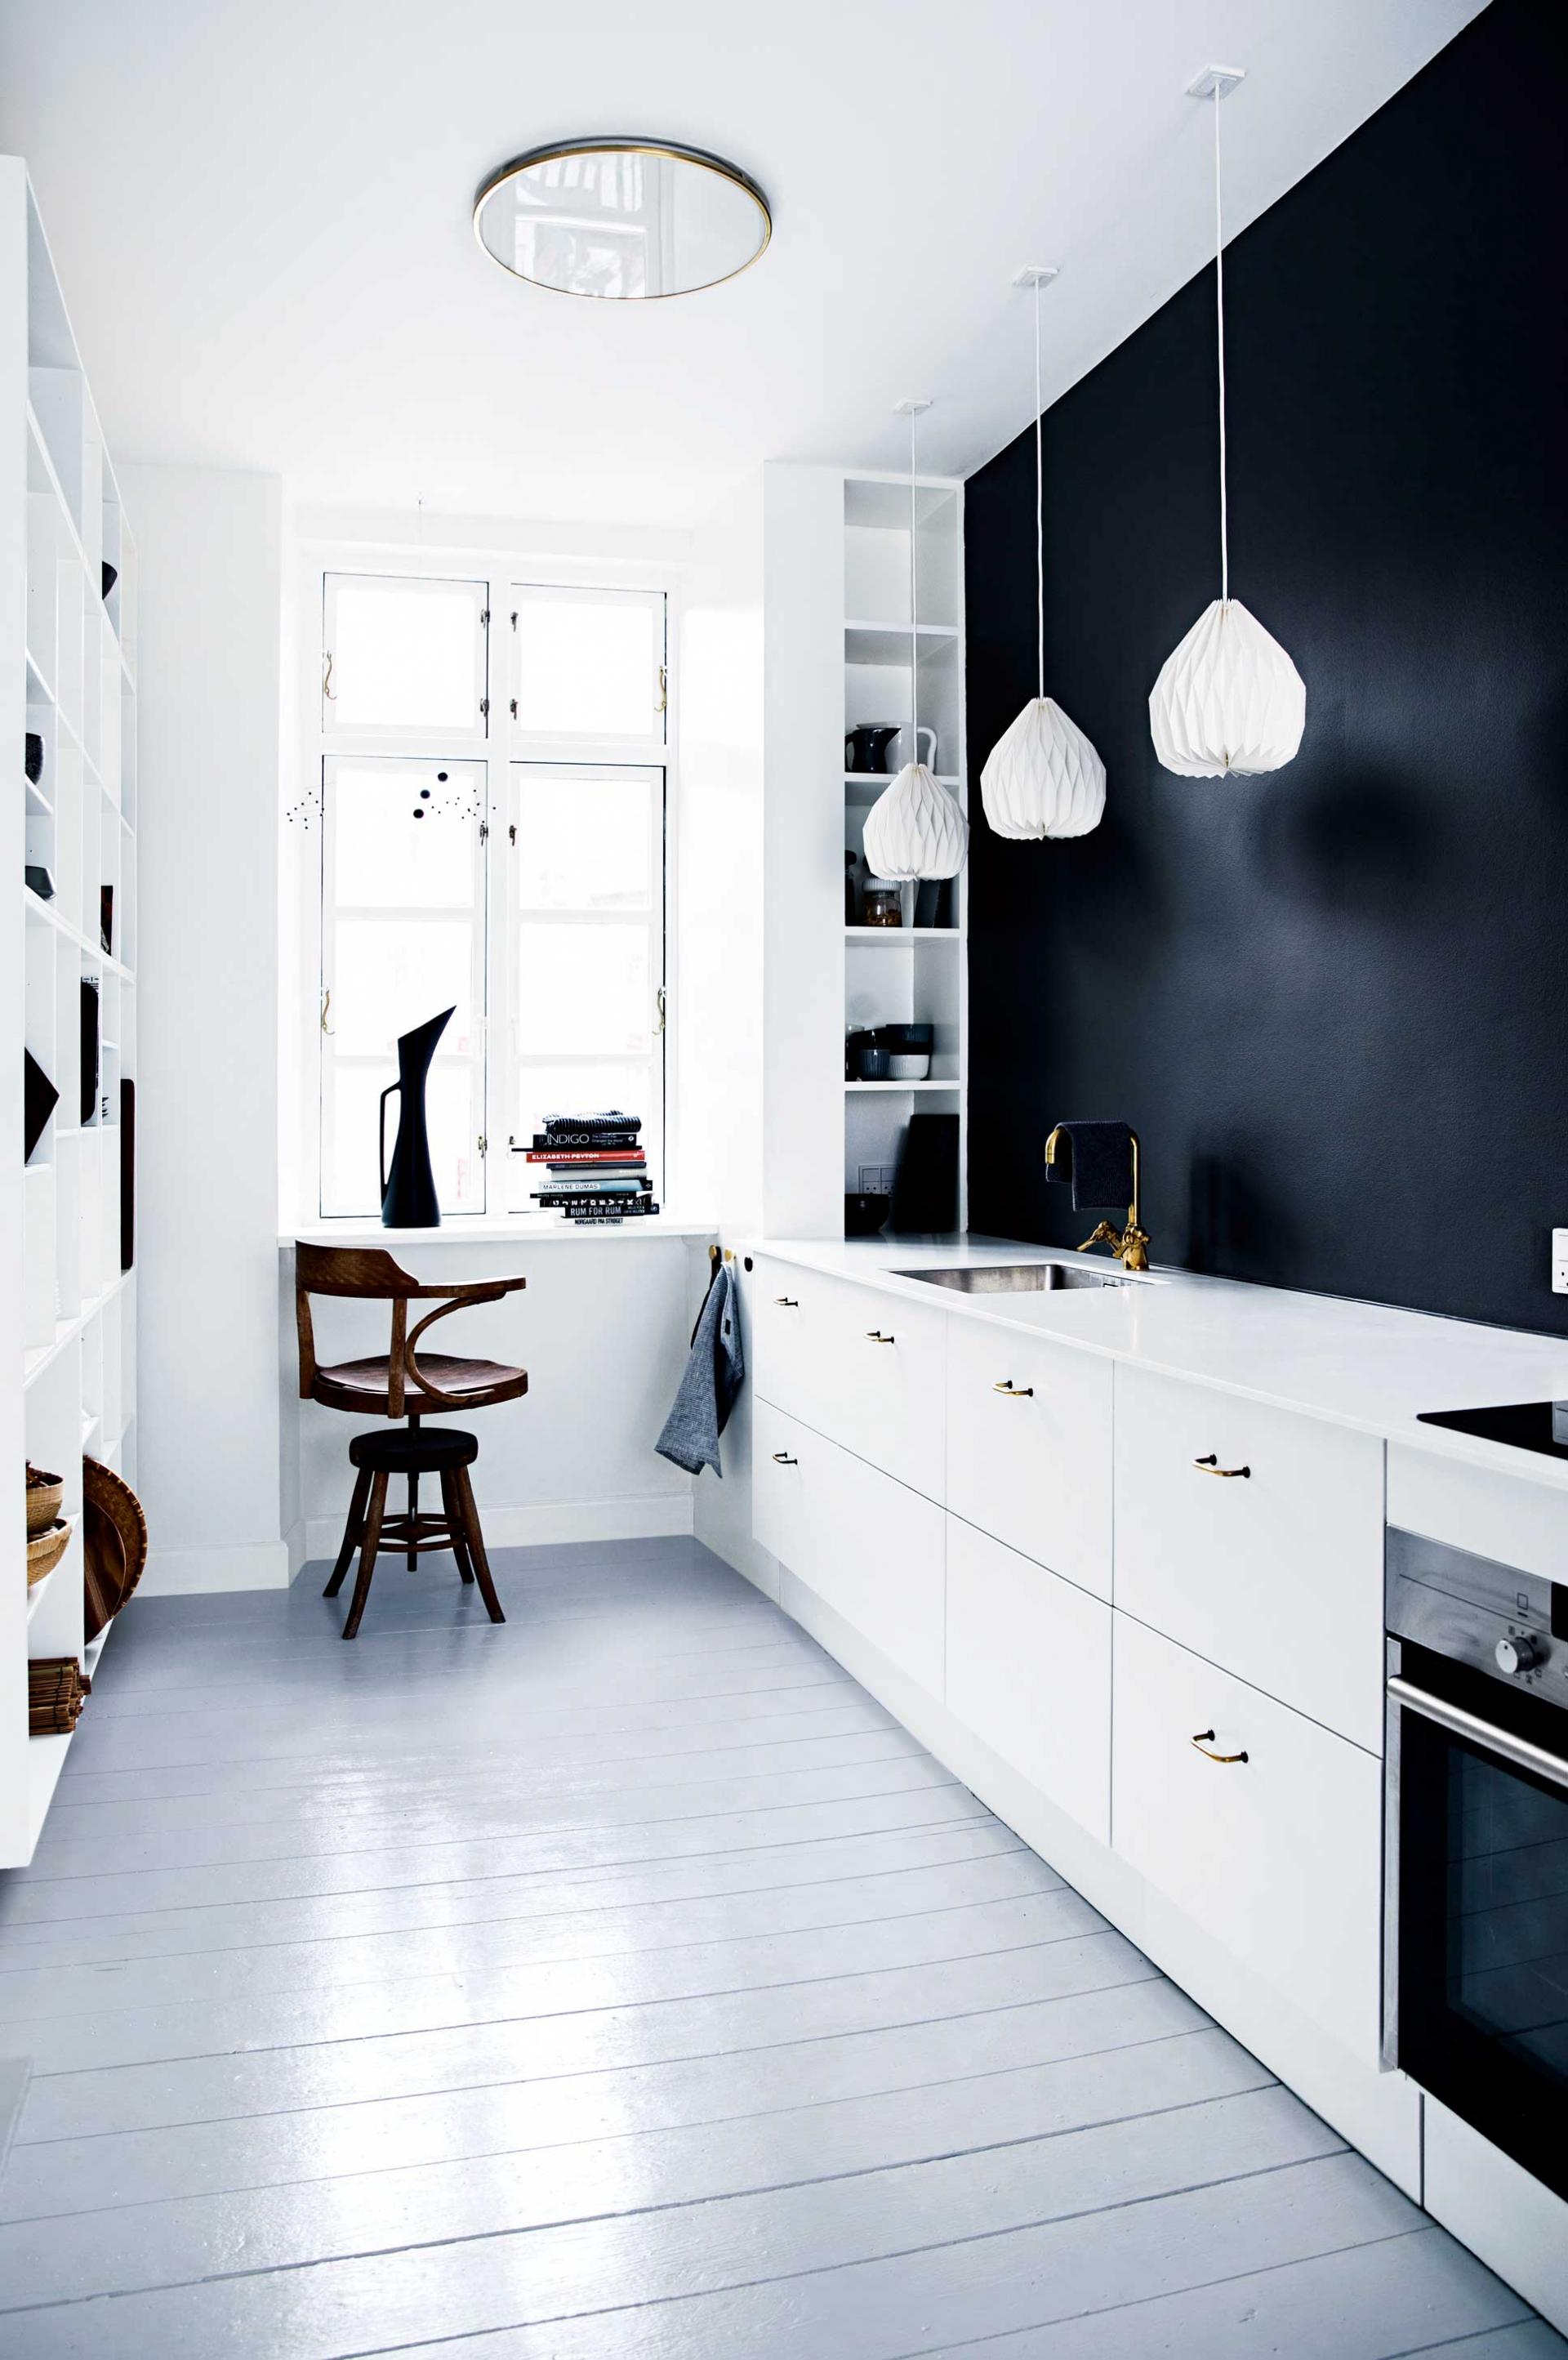 Black wall kitchen restyling: one kitchen two styles